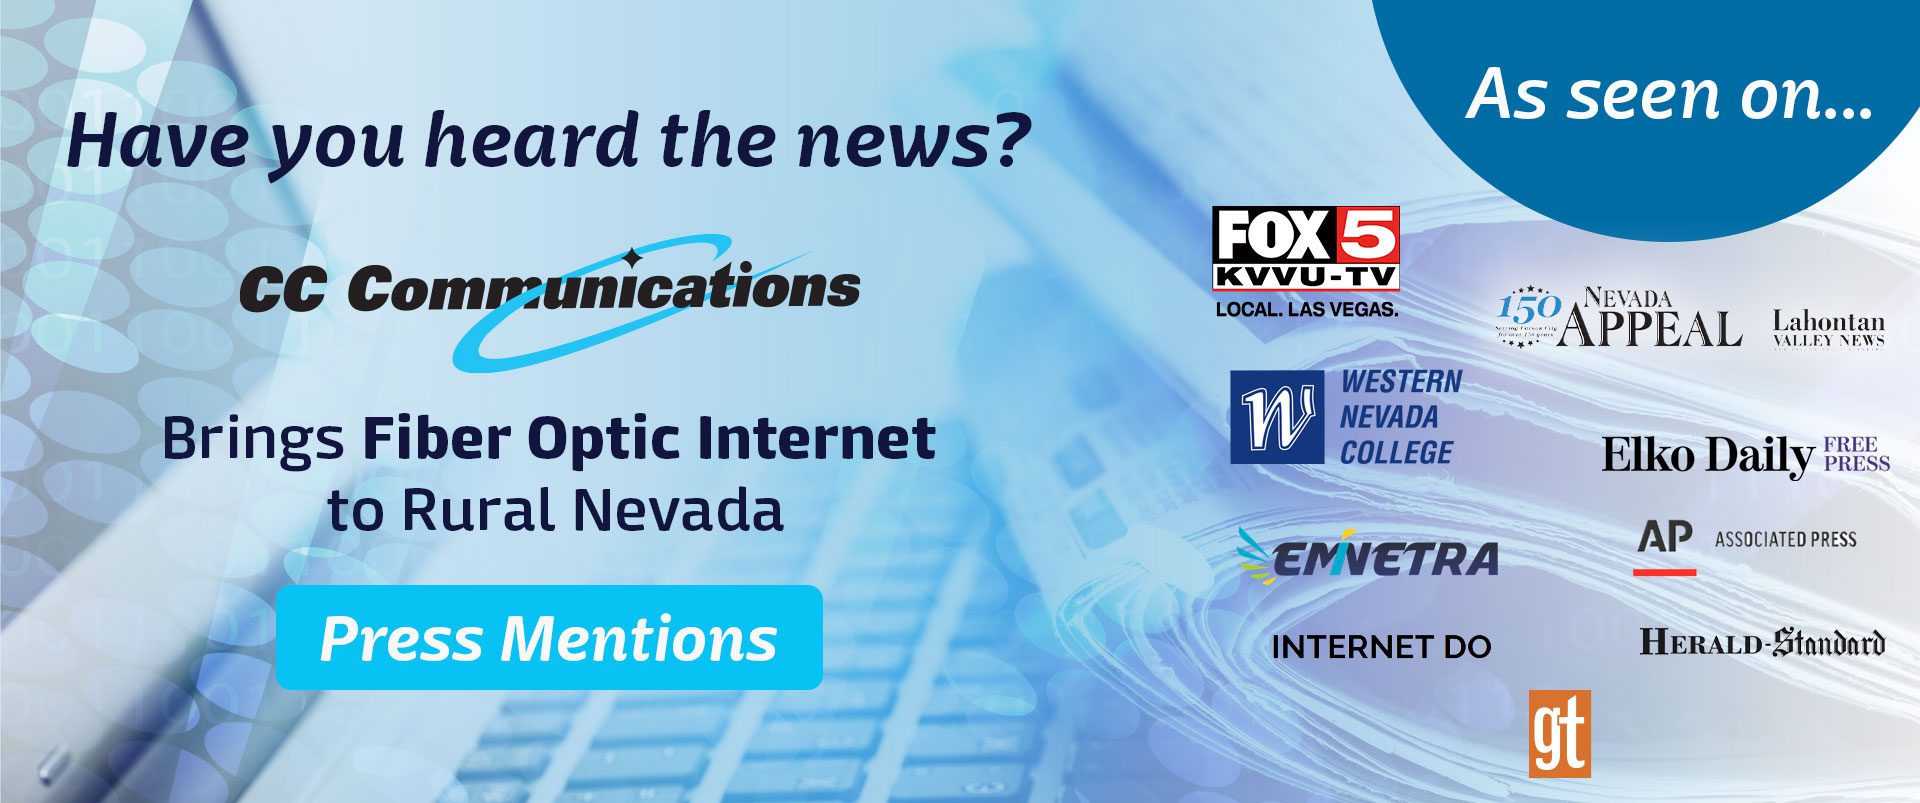 Have you heard the news? CC Communications brings Fiber Optic Internet to Rural Nevada.